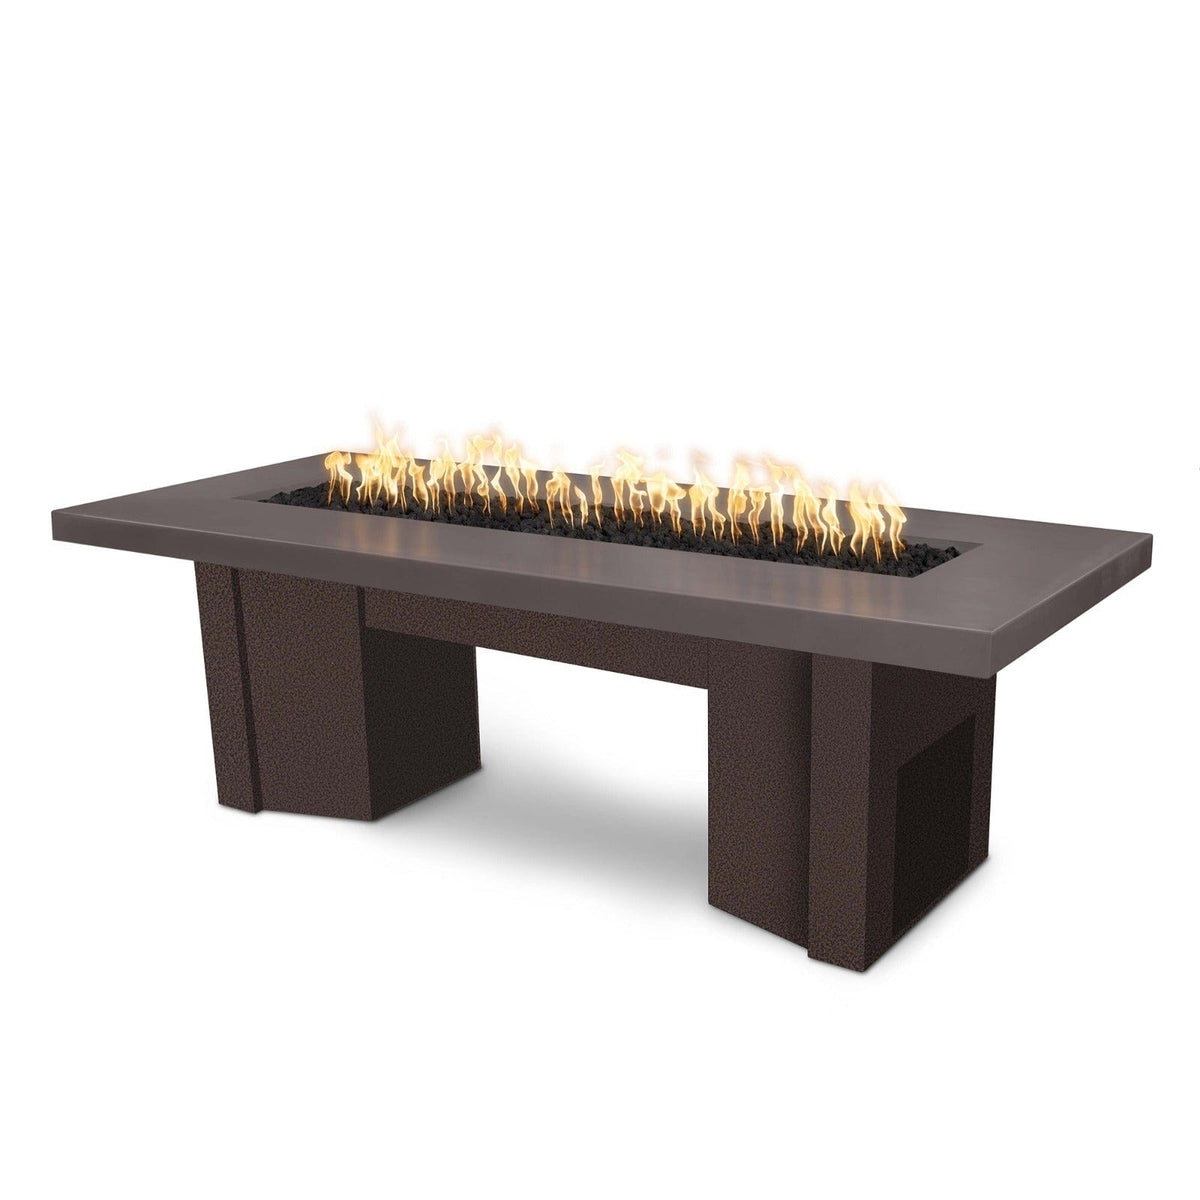 The Outdoor Plus Fire Features Chestnut (-CST) / Copper Vein Powder Coated Steel (-CPV) The Outdoor Plus 78&quot; Alameda Fire Table Smooth Concrete in Natural Gas - 110V Plug &amp; Play Electronic Ignition / OPT-ALMGFRC78EKIT-NG